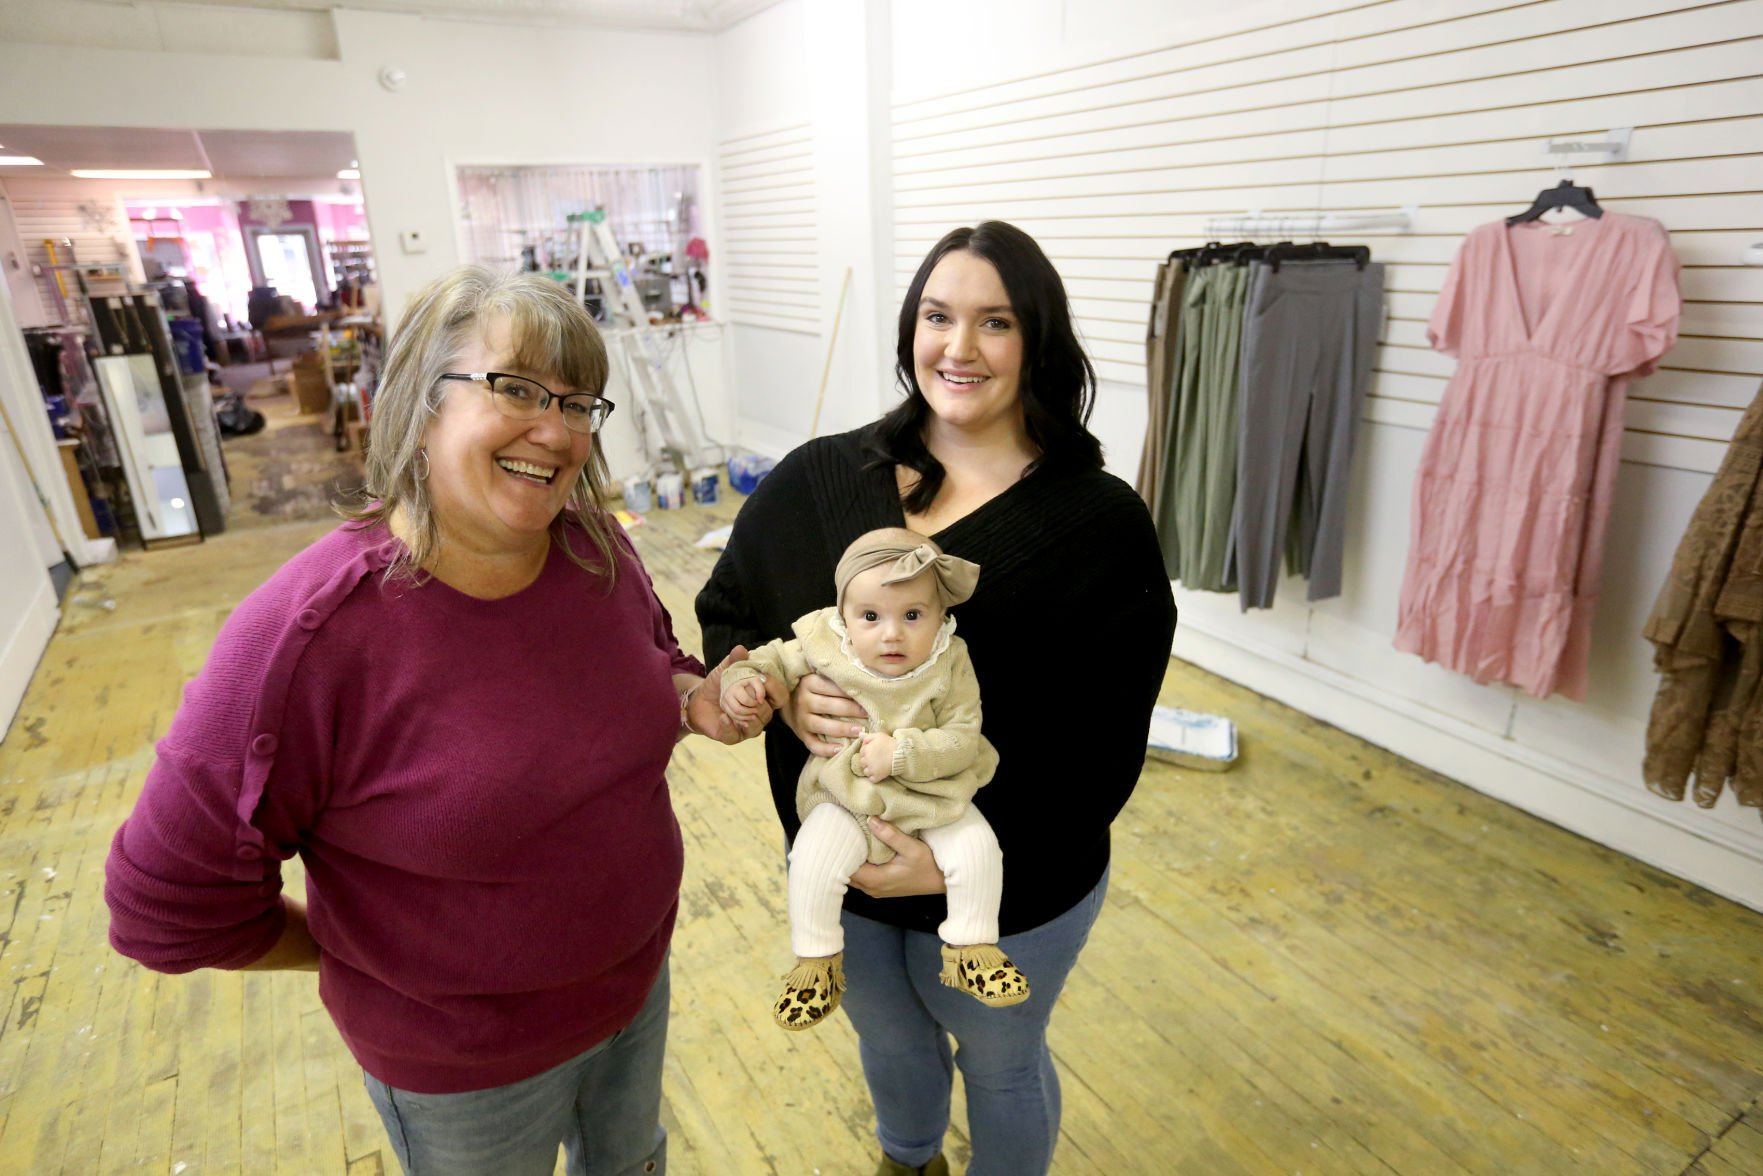 Terri Meadows (left) and Anna Meadows, who is holding her daughter, Amina Zulic, 4 months, stand at Momerella in Dubuque on Monday. The new store will be located at the former HJ